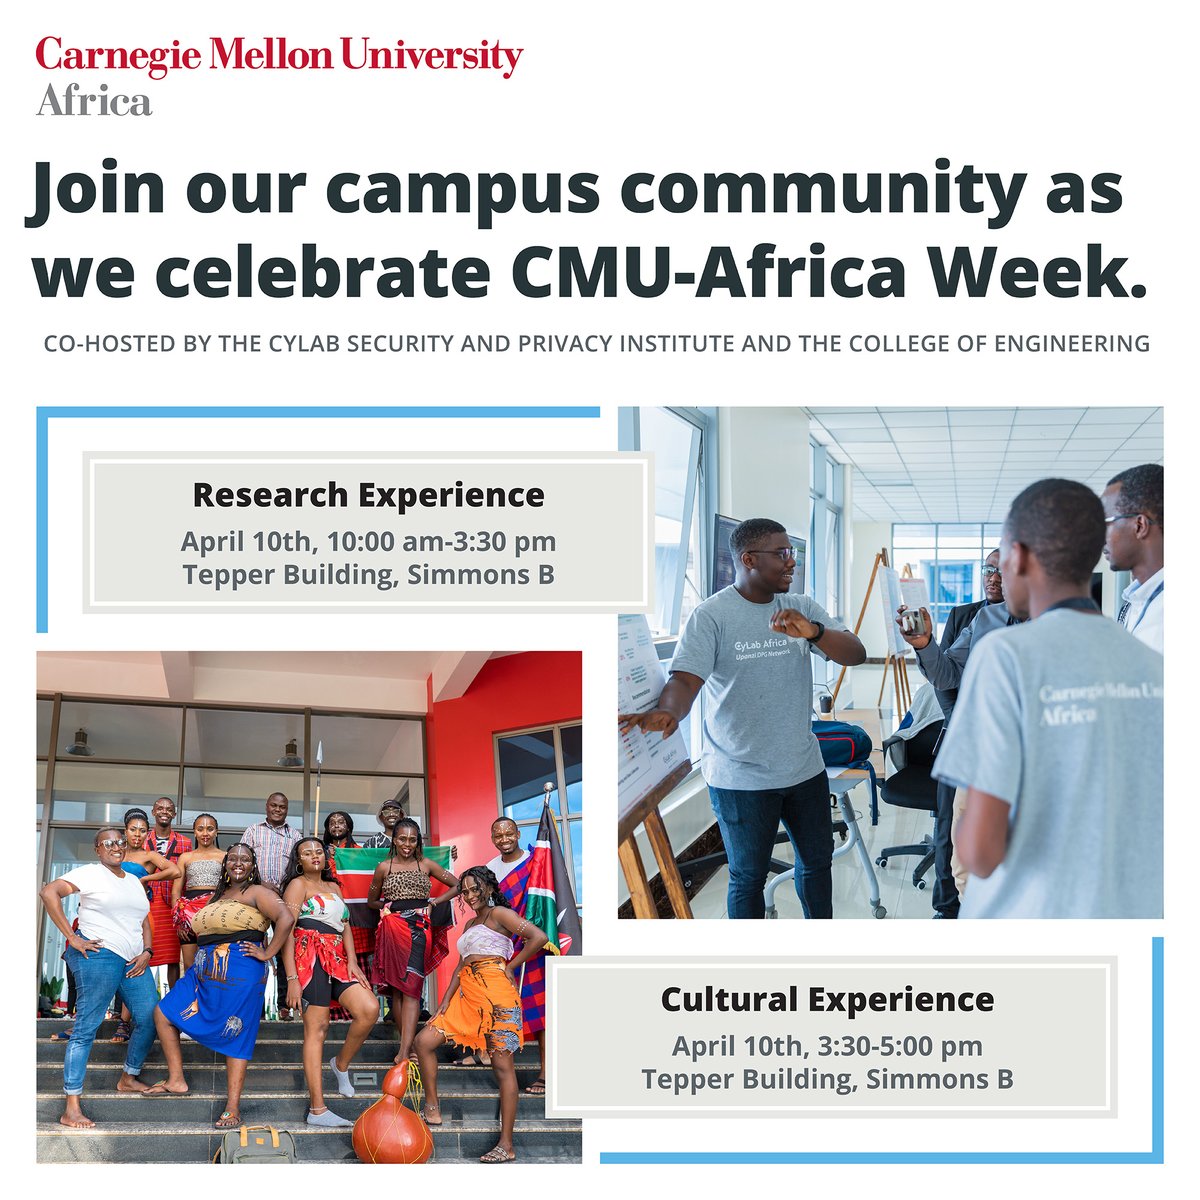 Join us April 10th for a two-part event on our Pittsburgh campus as we celebrate CMU-Africa Week! Research Experience: Connect with students from @CMU_Africa as they share their research Cultural Experience: Learn about African culture and life at CMU's Kigali, Rwanda location